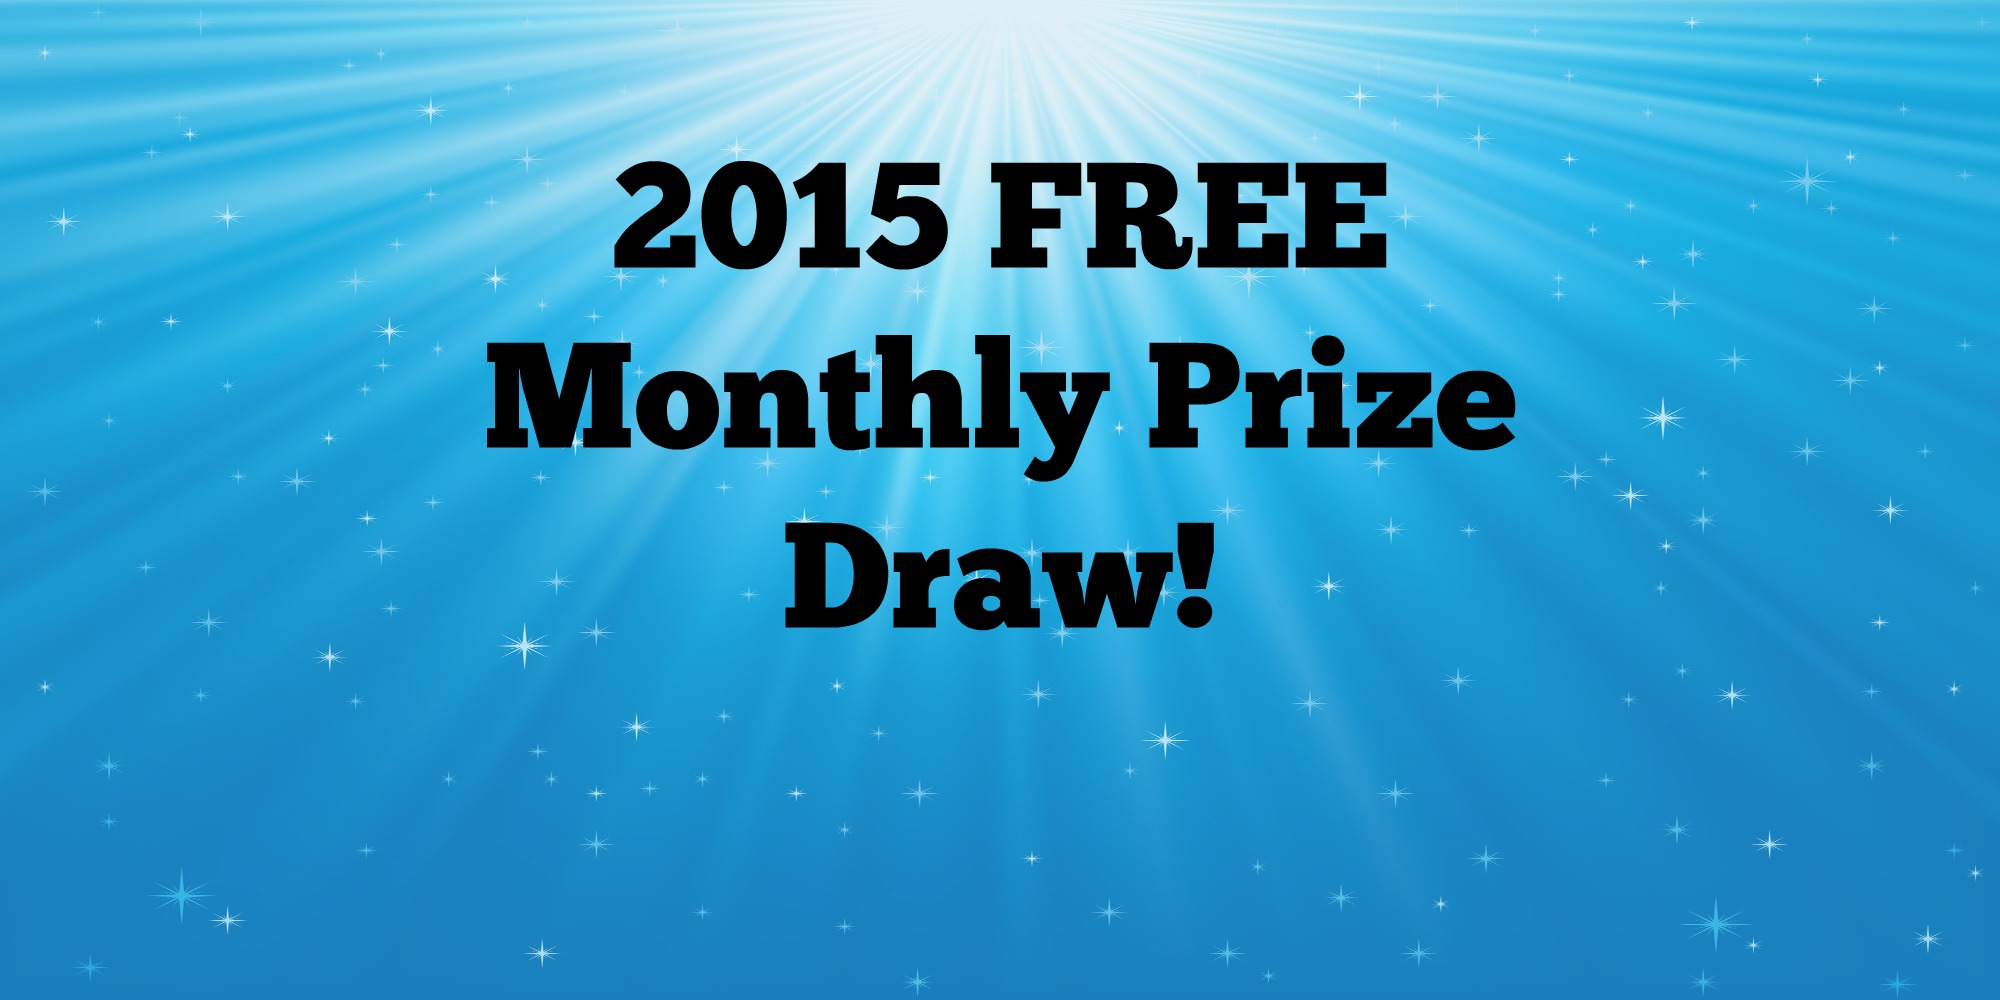 2015 FREE Monthly Prize Draw